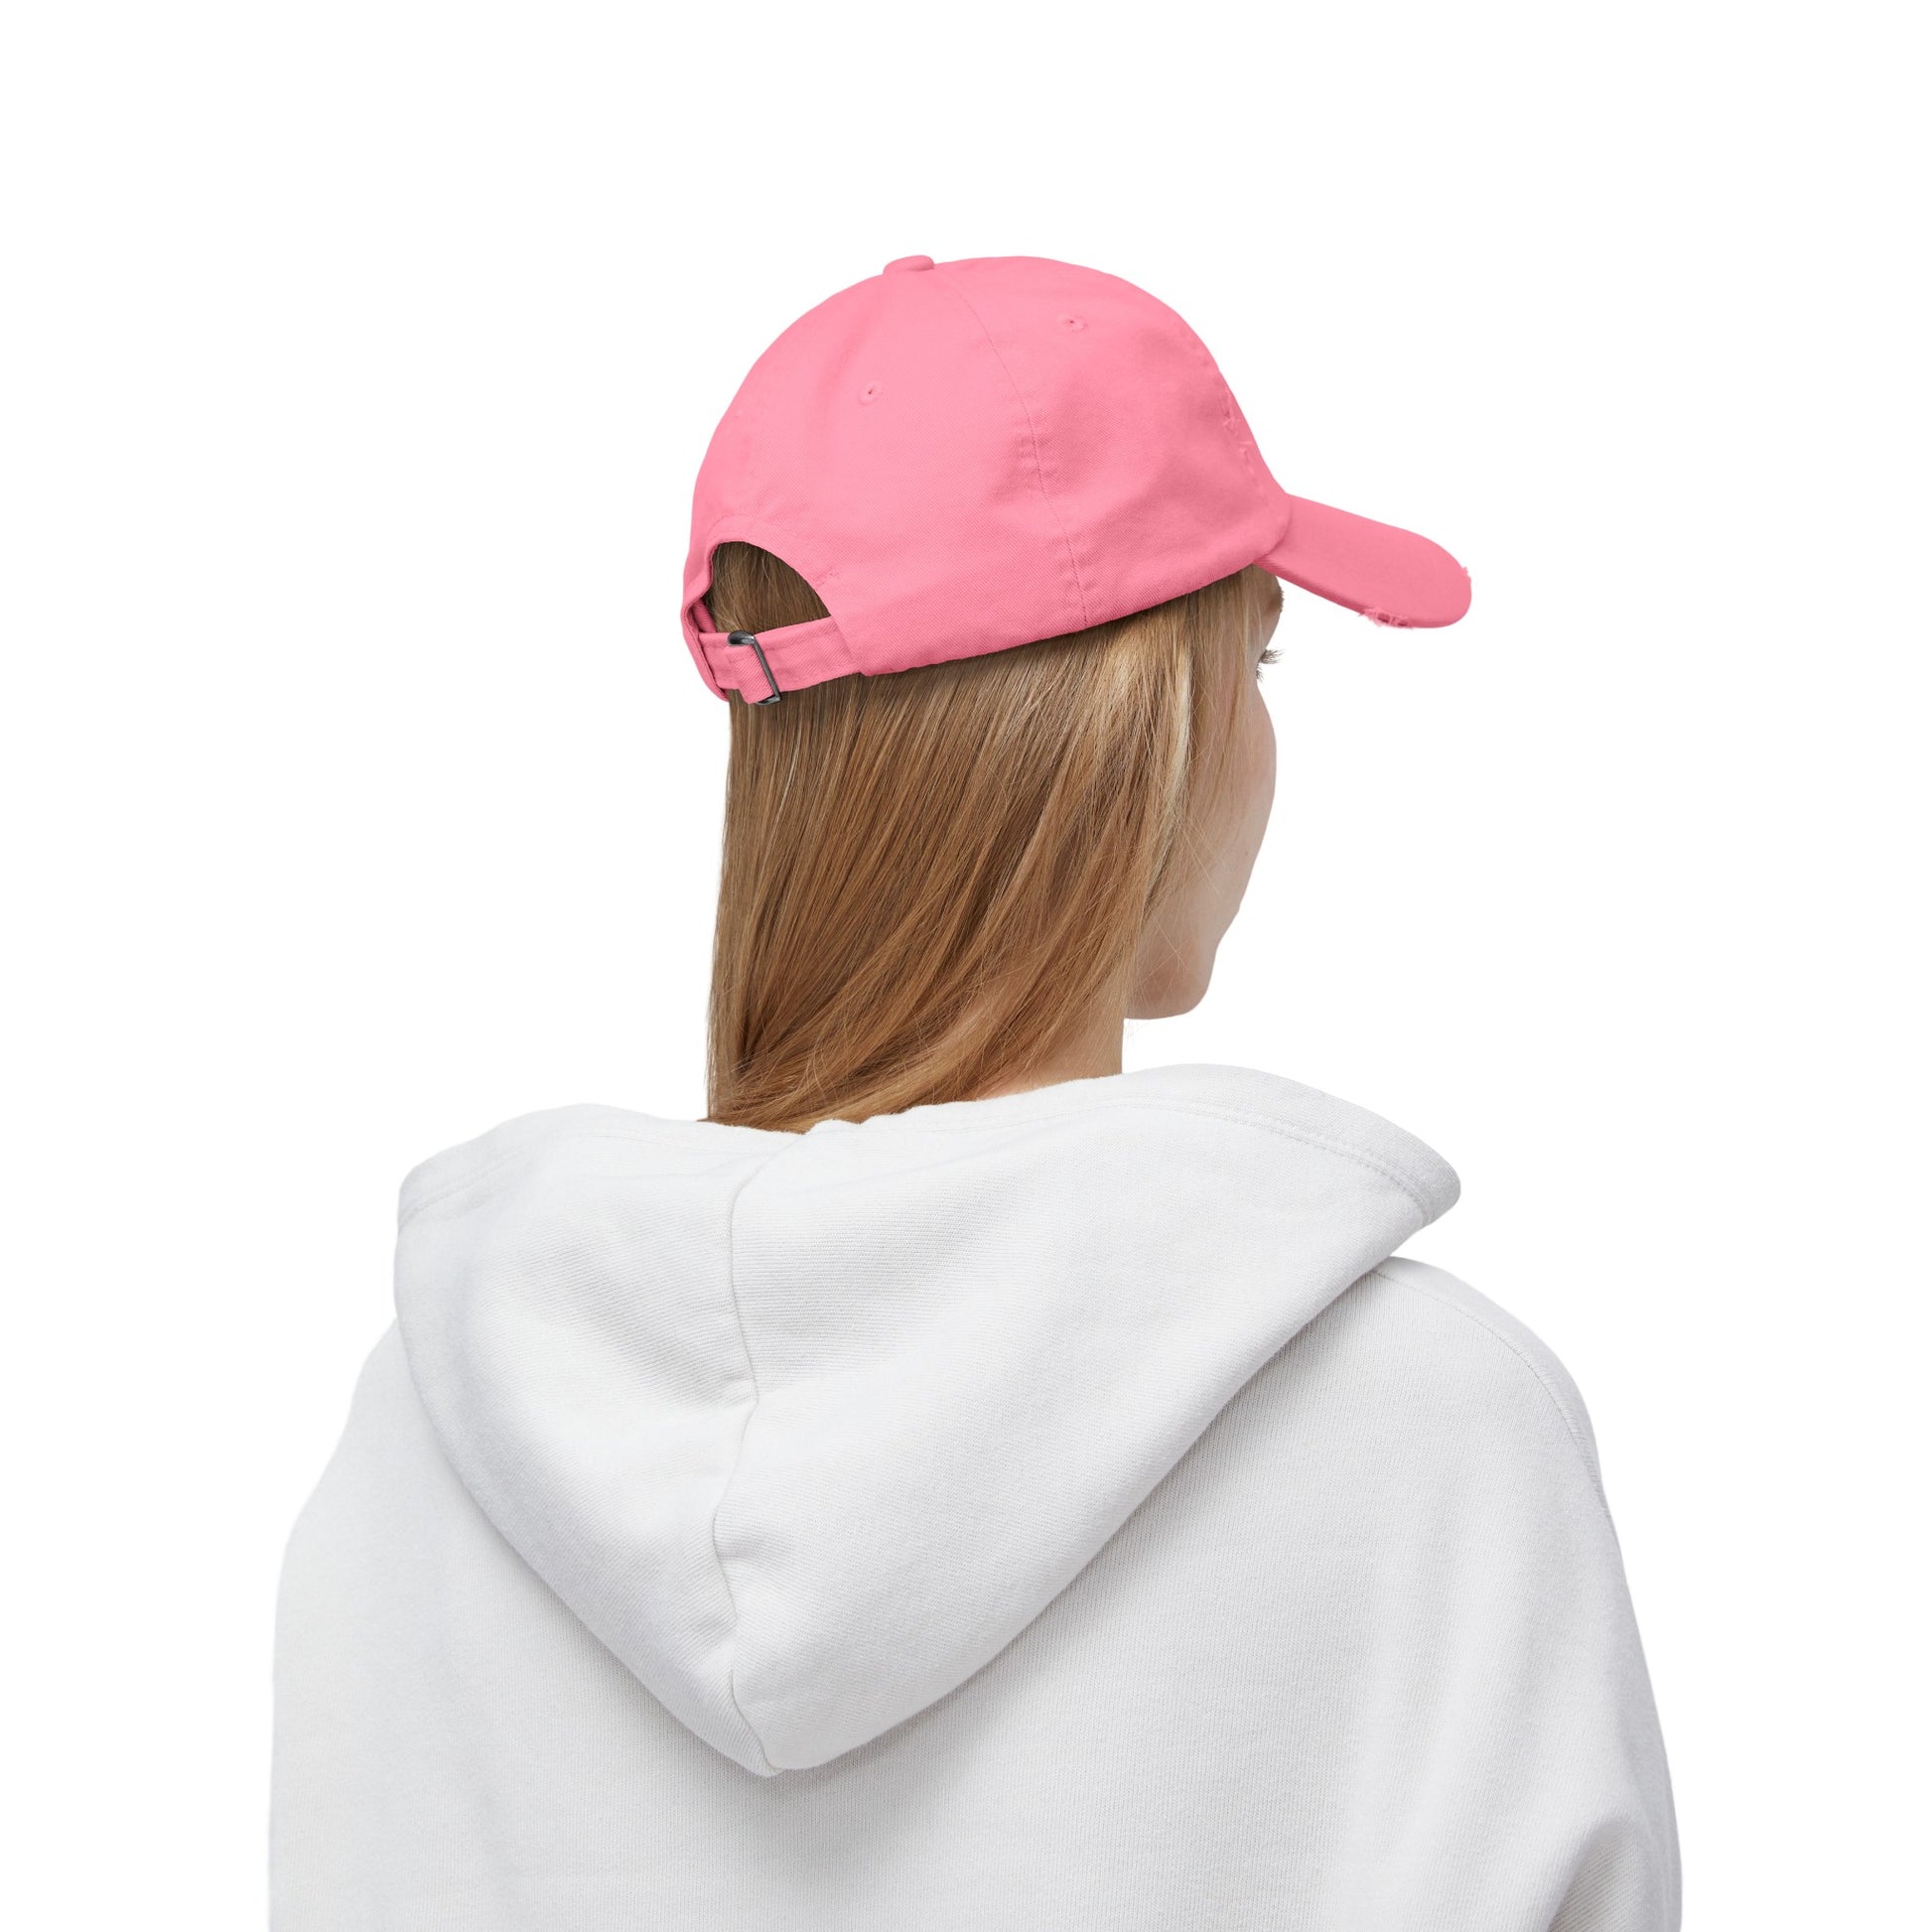 a woman wearing a pink hat and a white sweatshirt